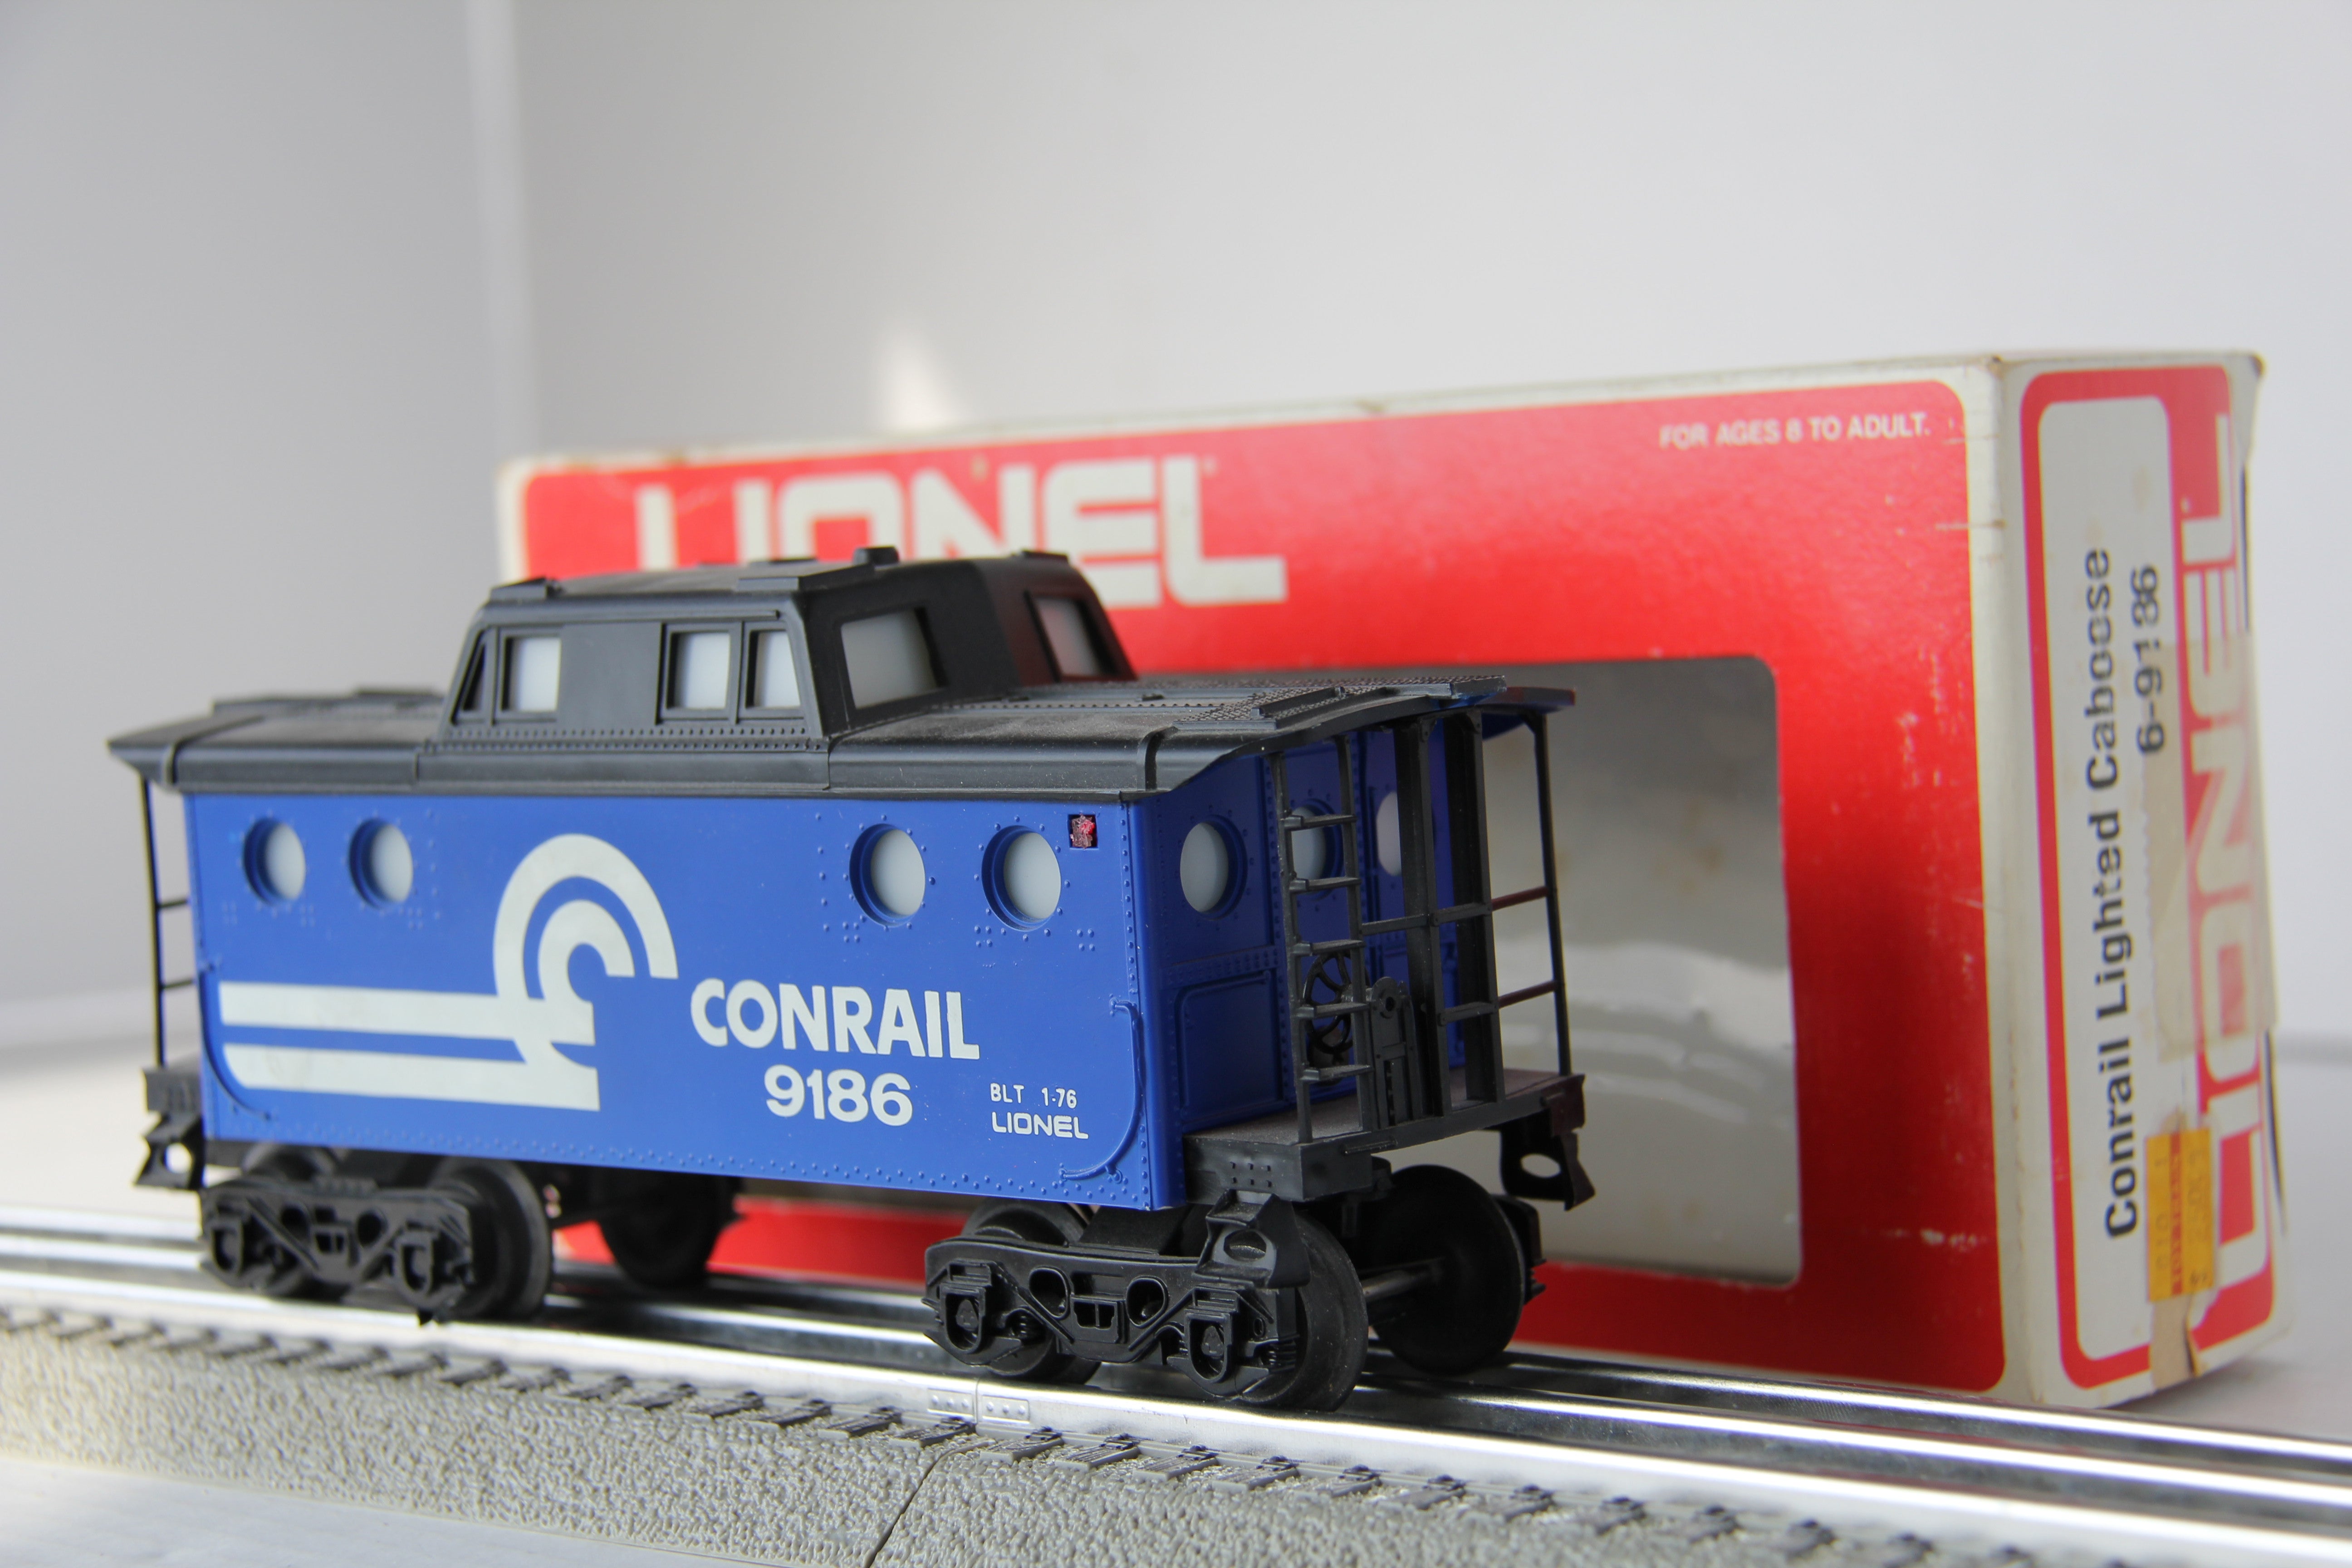 Lionel 6-9186 Conrail Lighted Caboose-Second hand-M3979